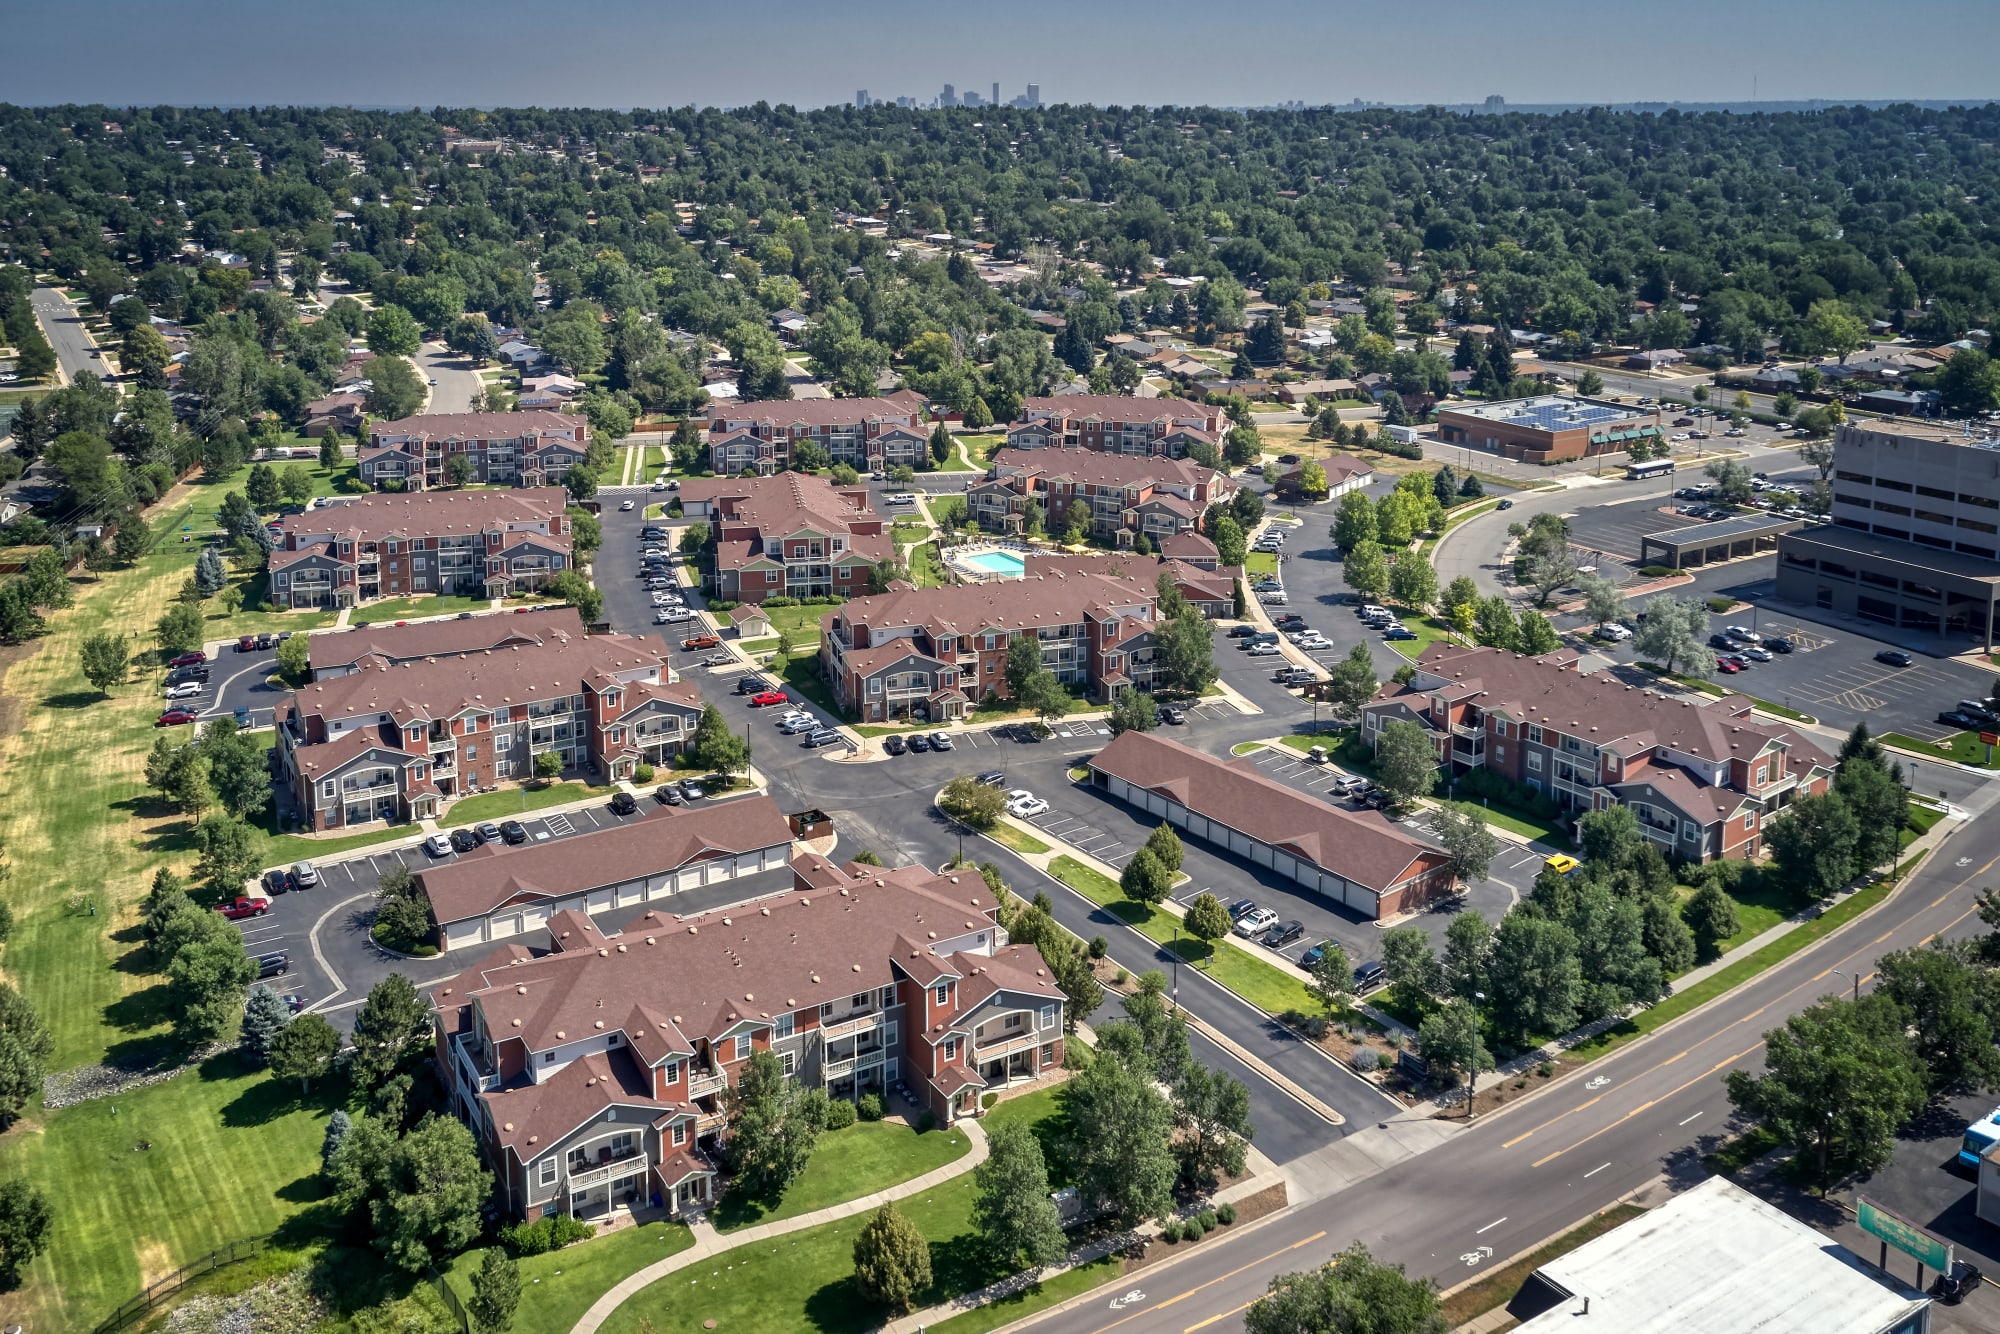 Aerial view of property and surrounding area at Bear Valley Park in Denver, Colorado